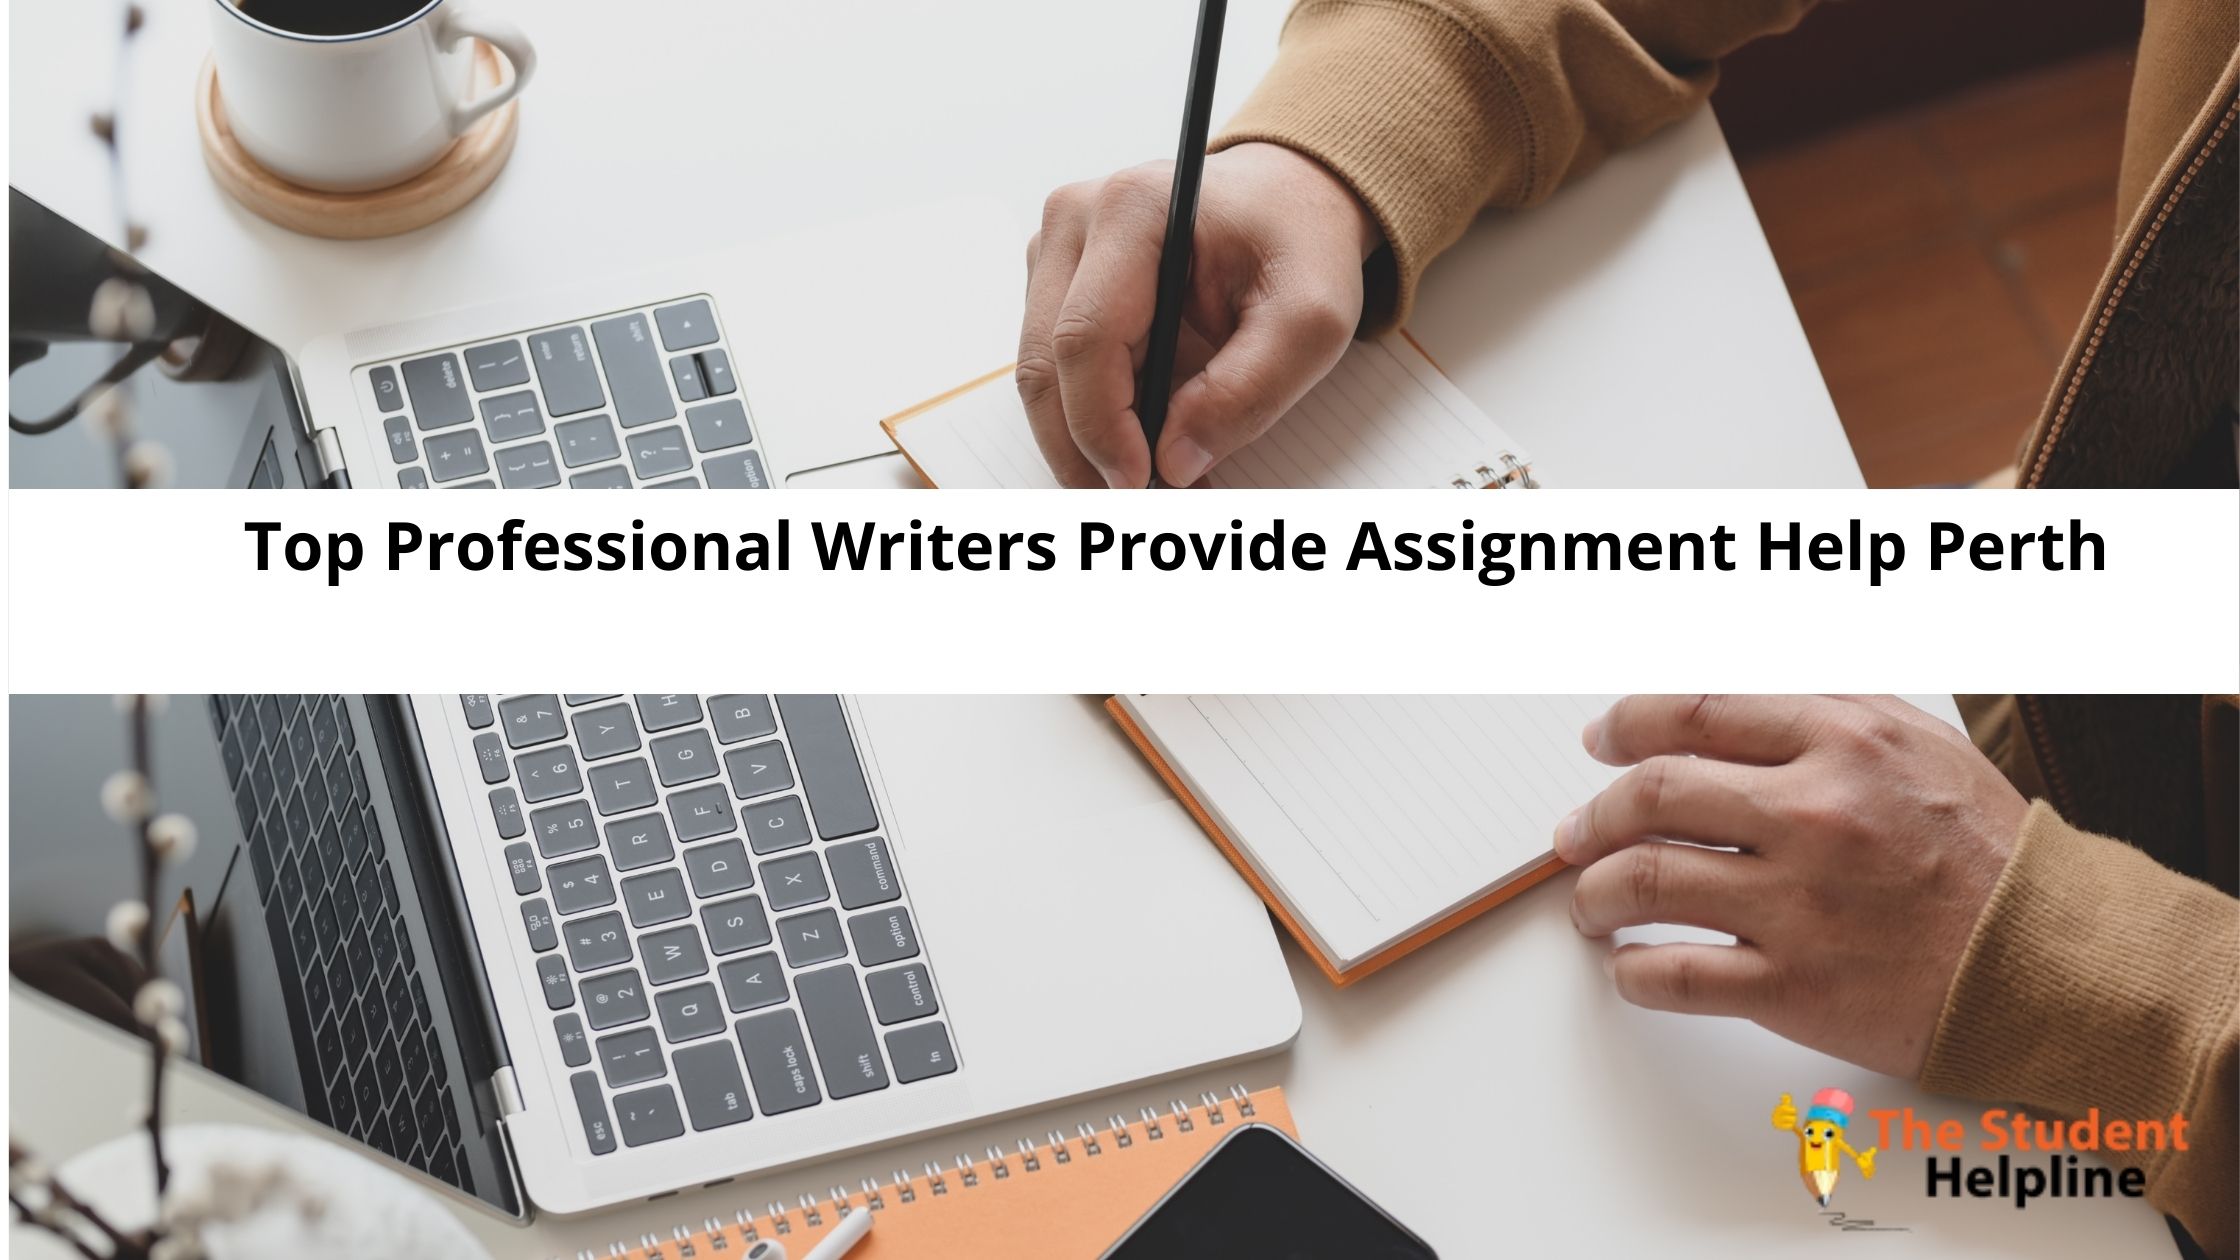 Top Professional Writers Provide Assignment Help Perth